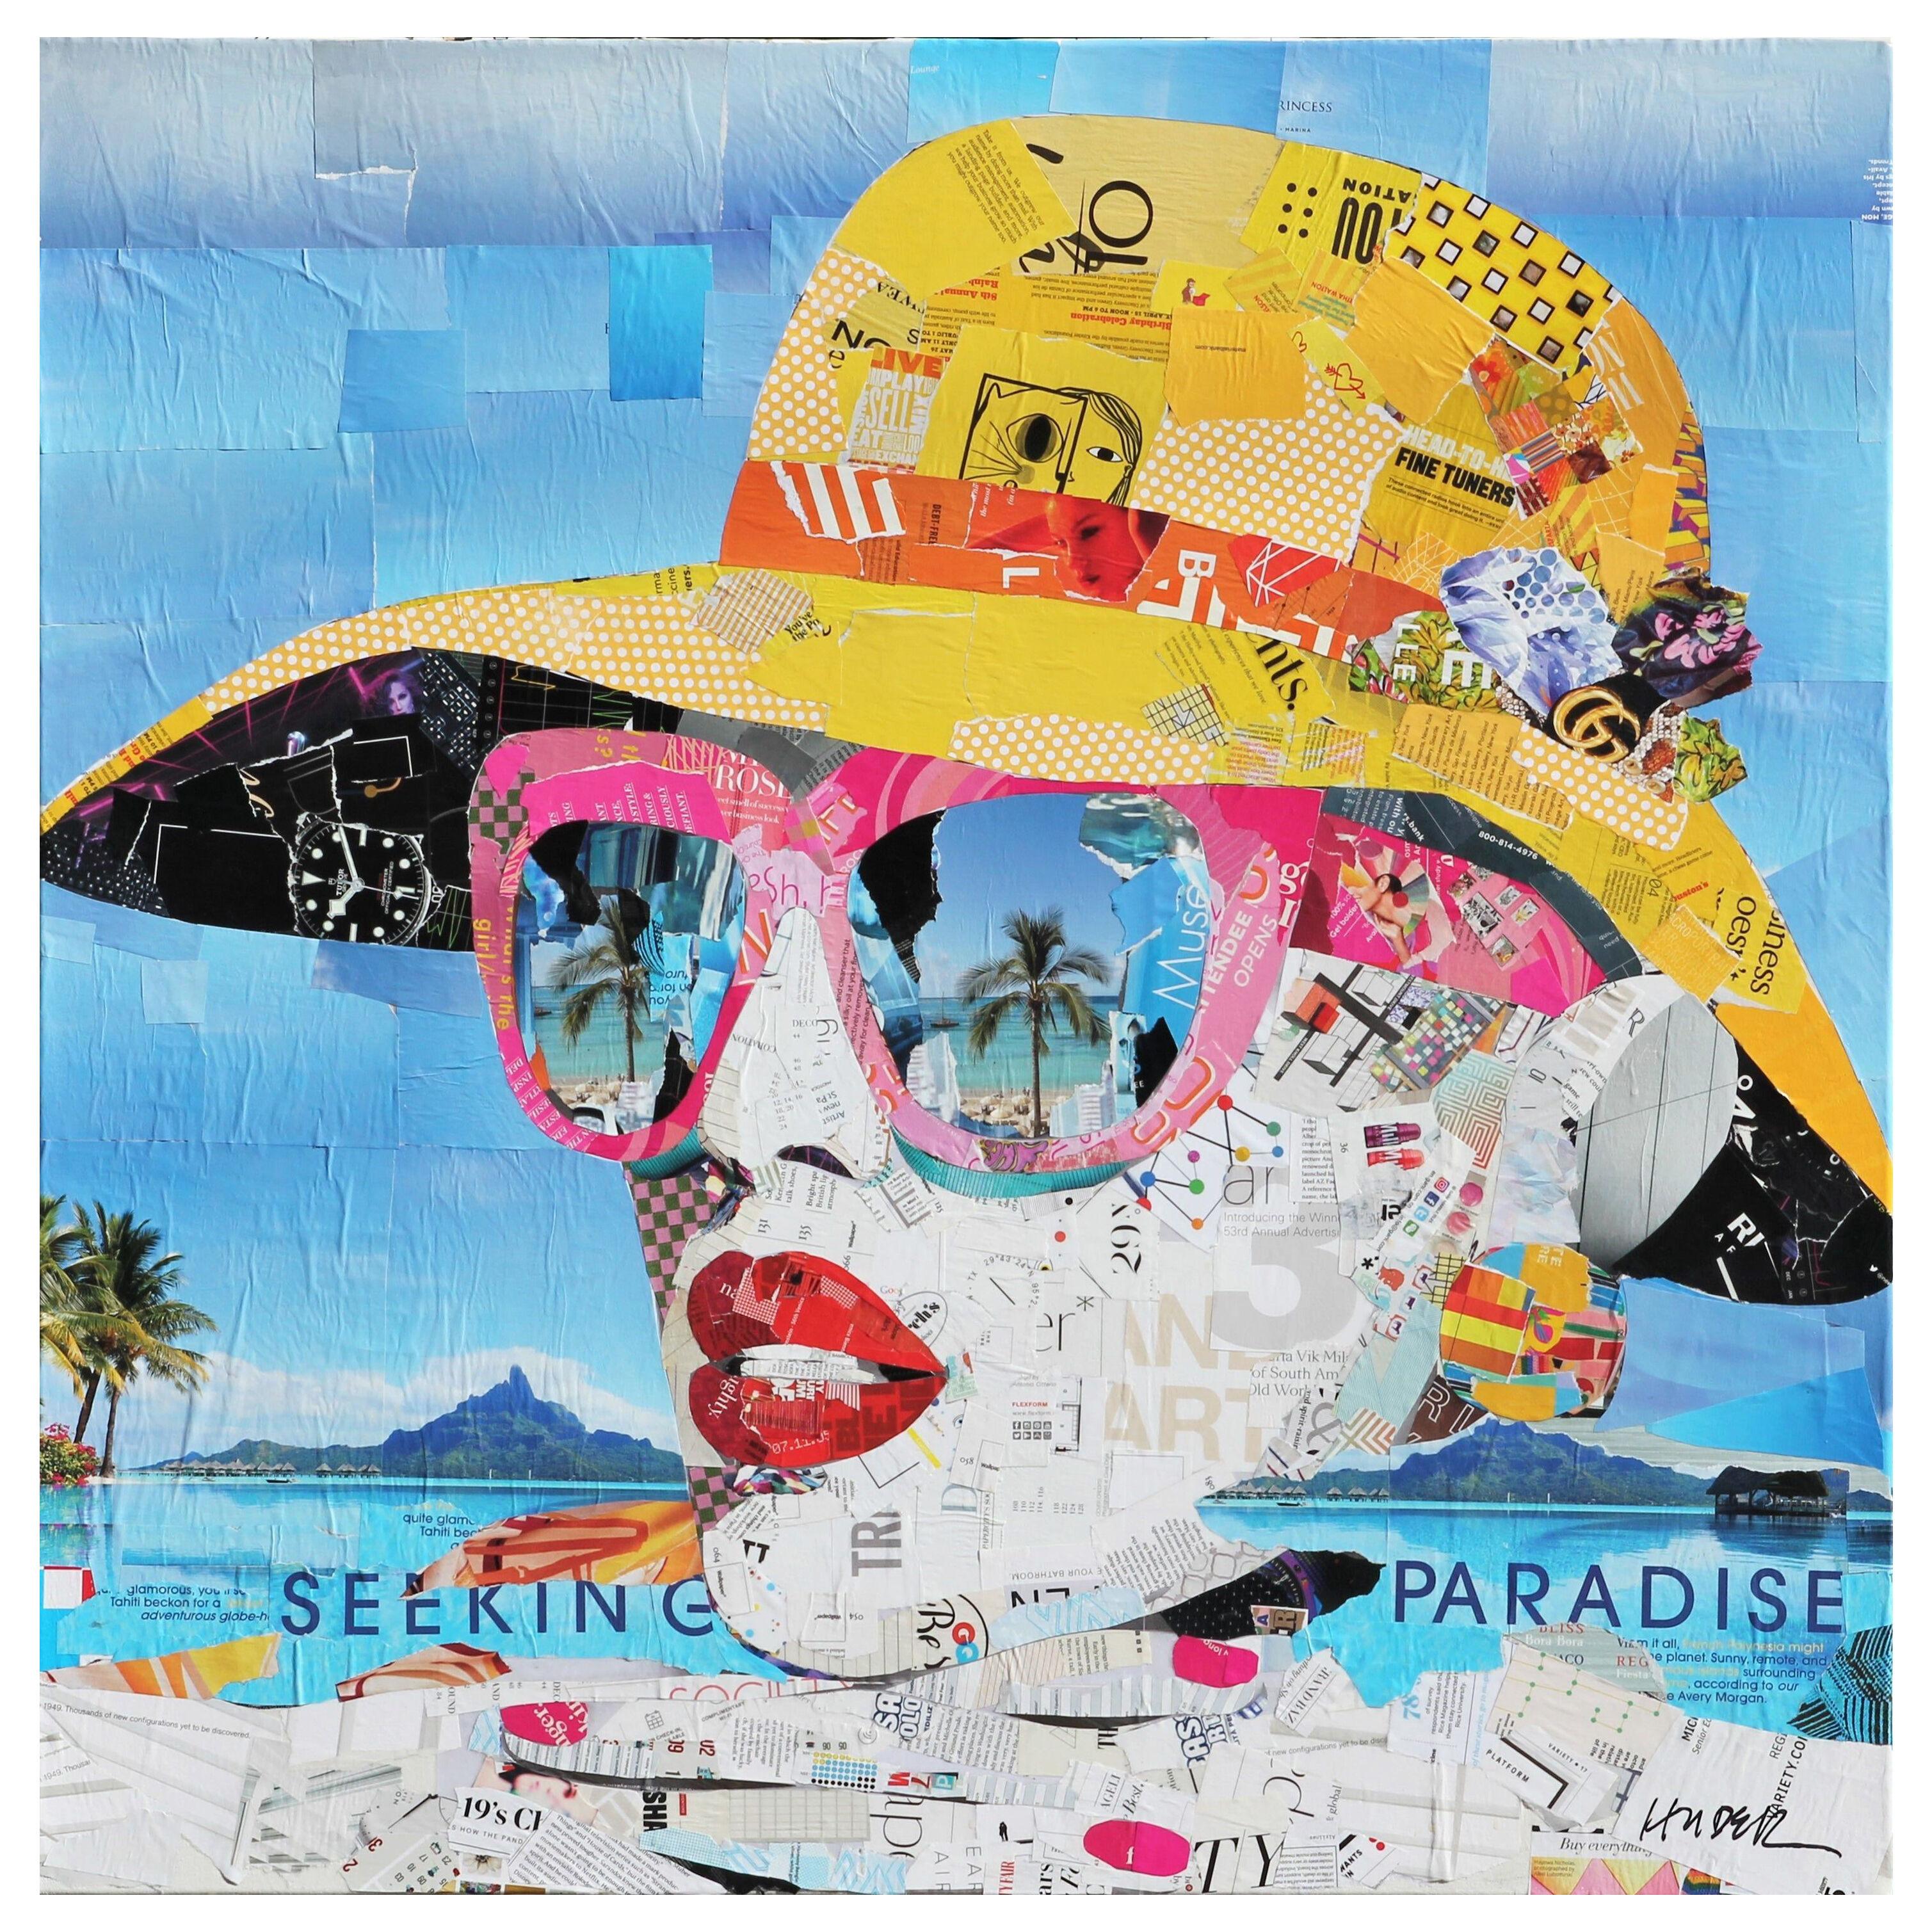 "Seeking Paradise" Tropical Vacation Mixed Media Pop Art Assemblage Collage